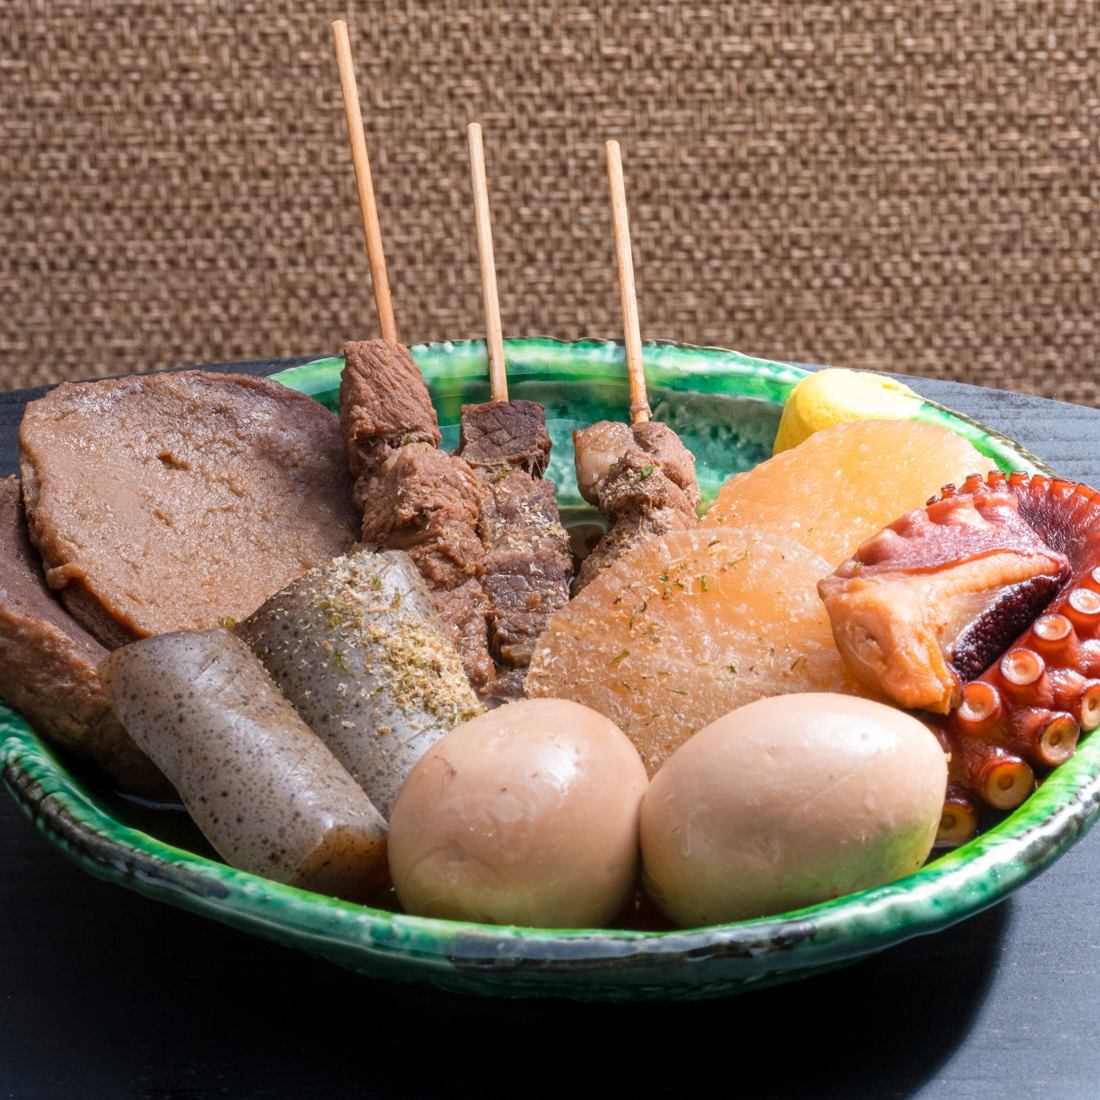 When you think of Shizuoka, you think of oden!Enjoy our specialty oden hotpot!